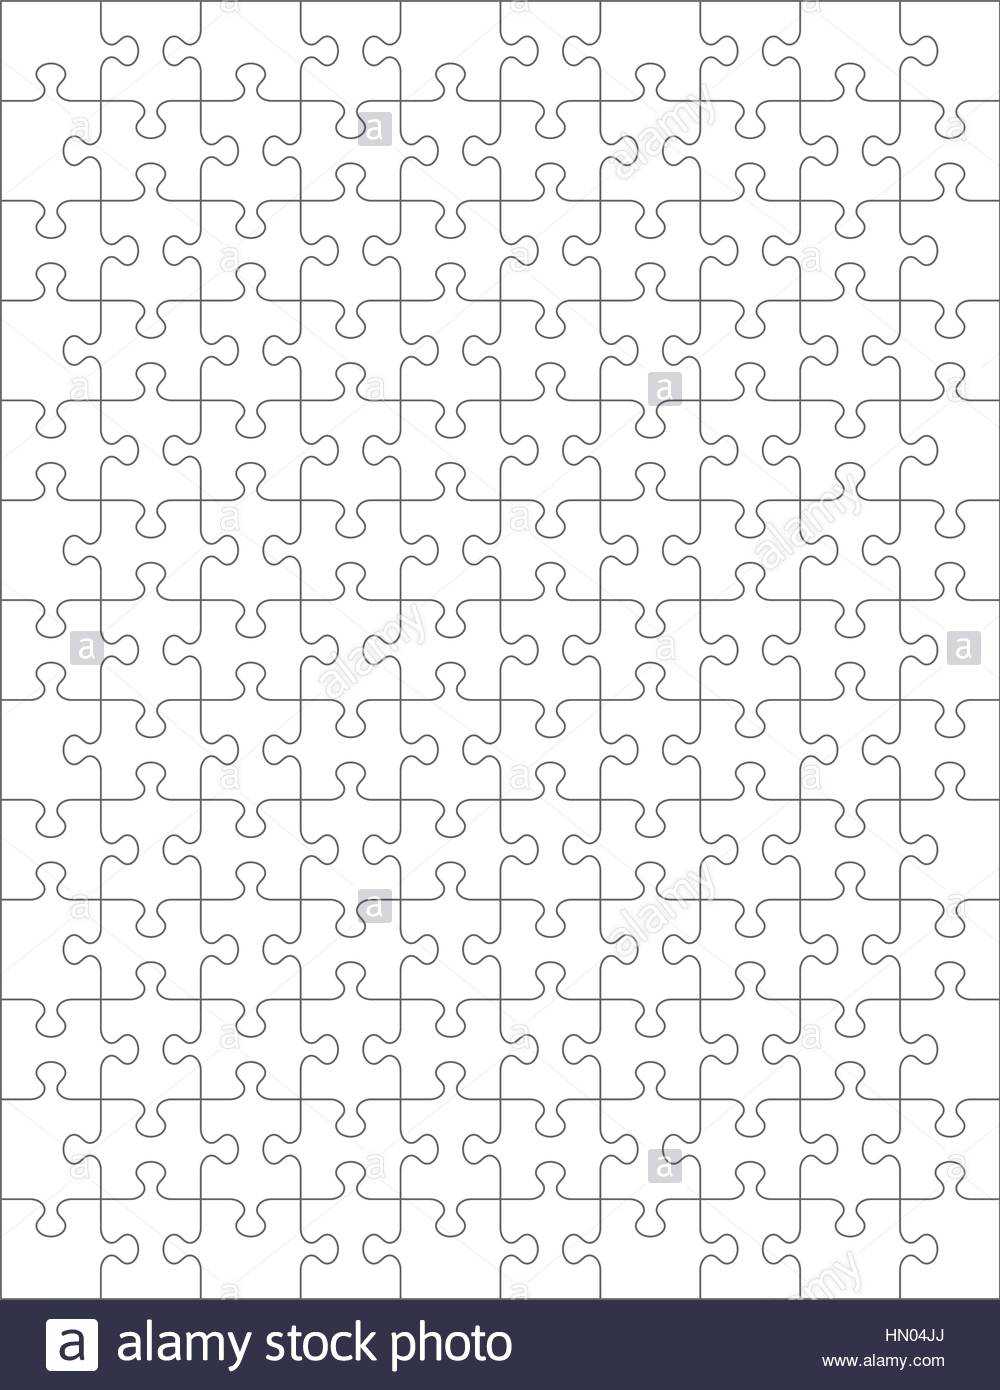 Jigsaw Puzzle Blank Template Of 130 Pieces. Vector And High Within Blank Jigsaw Piece Template